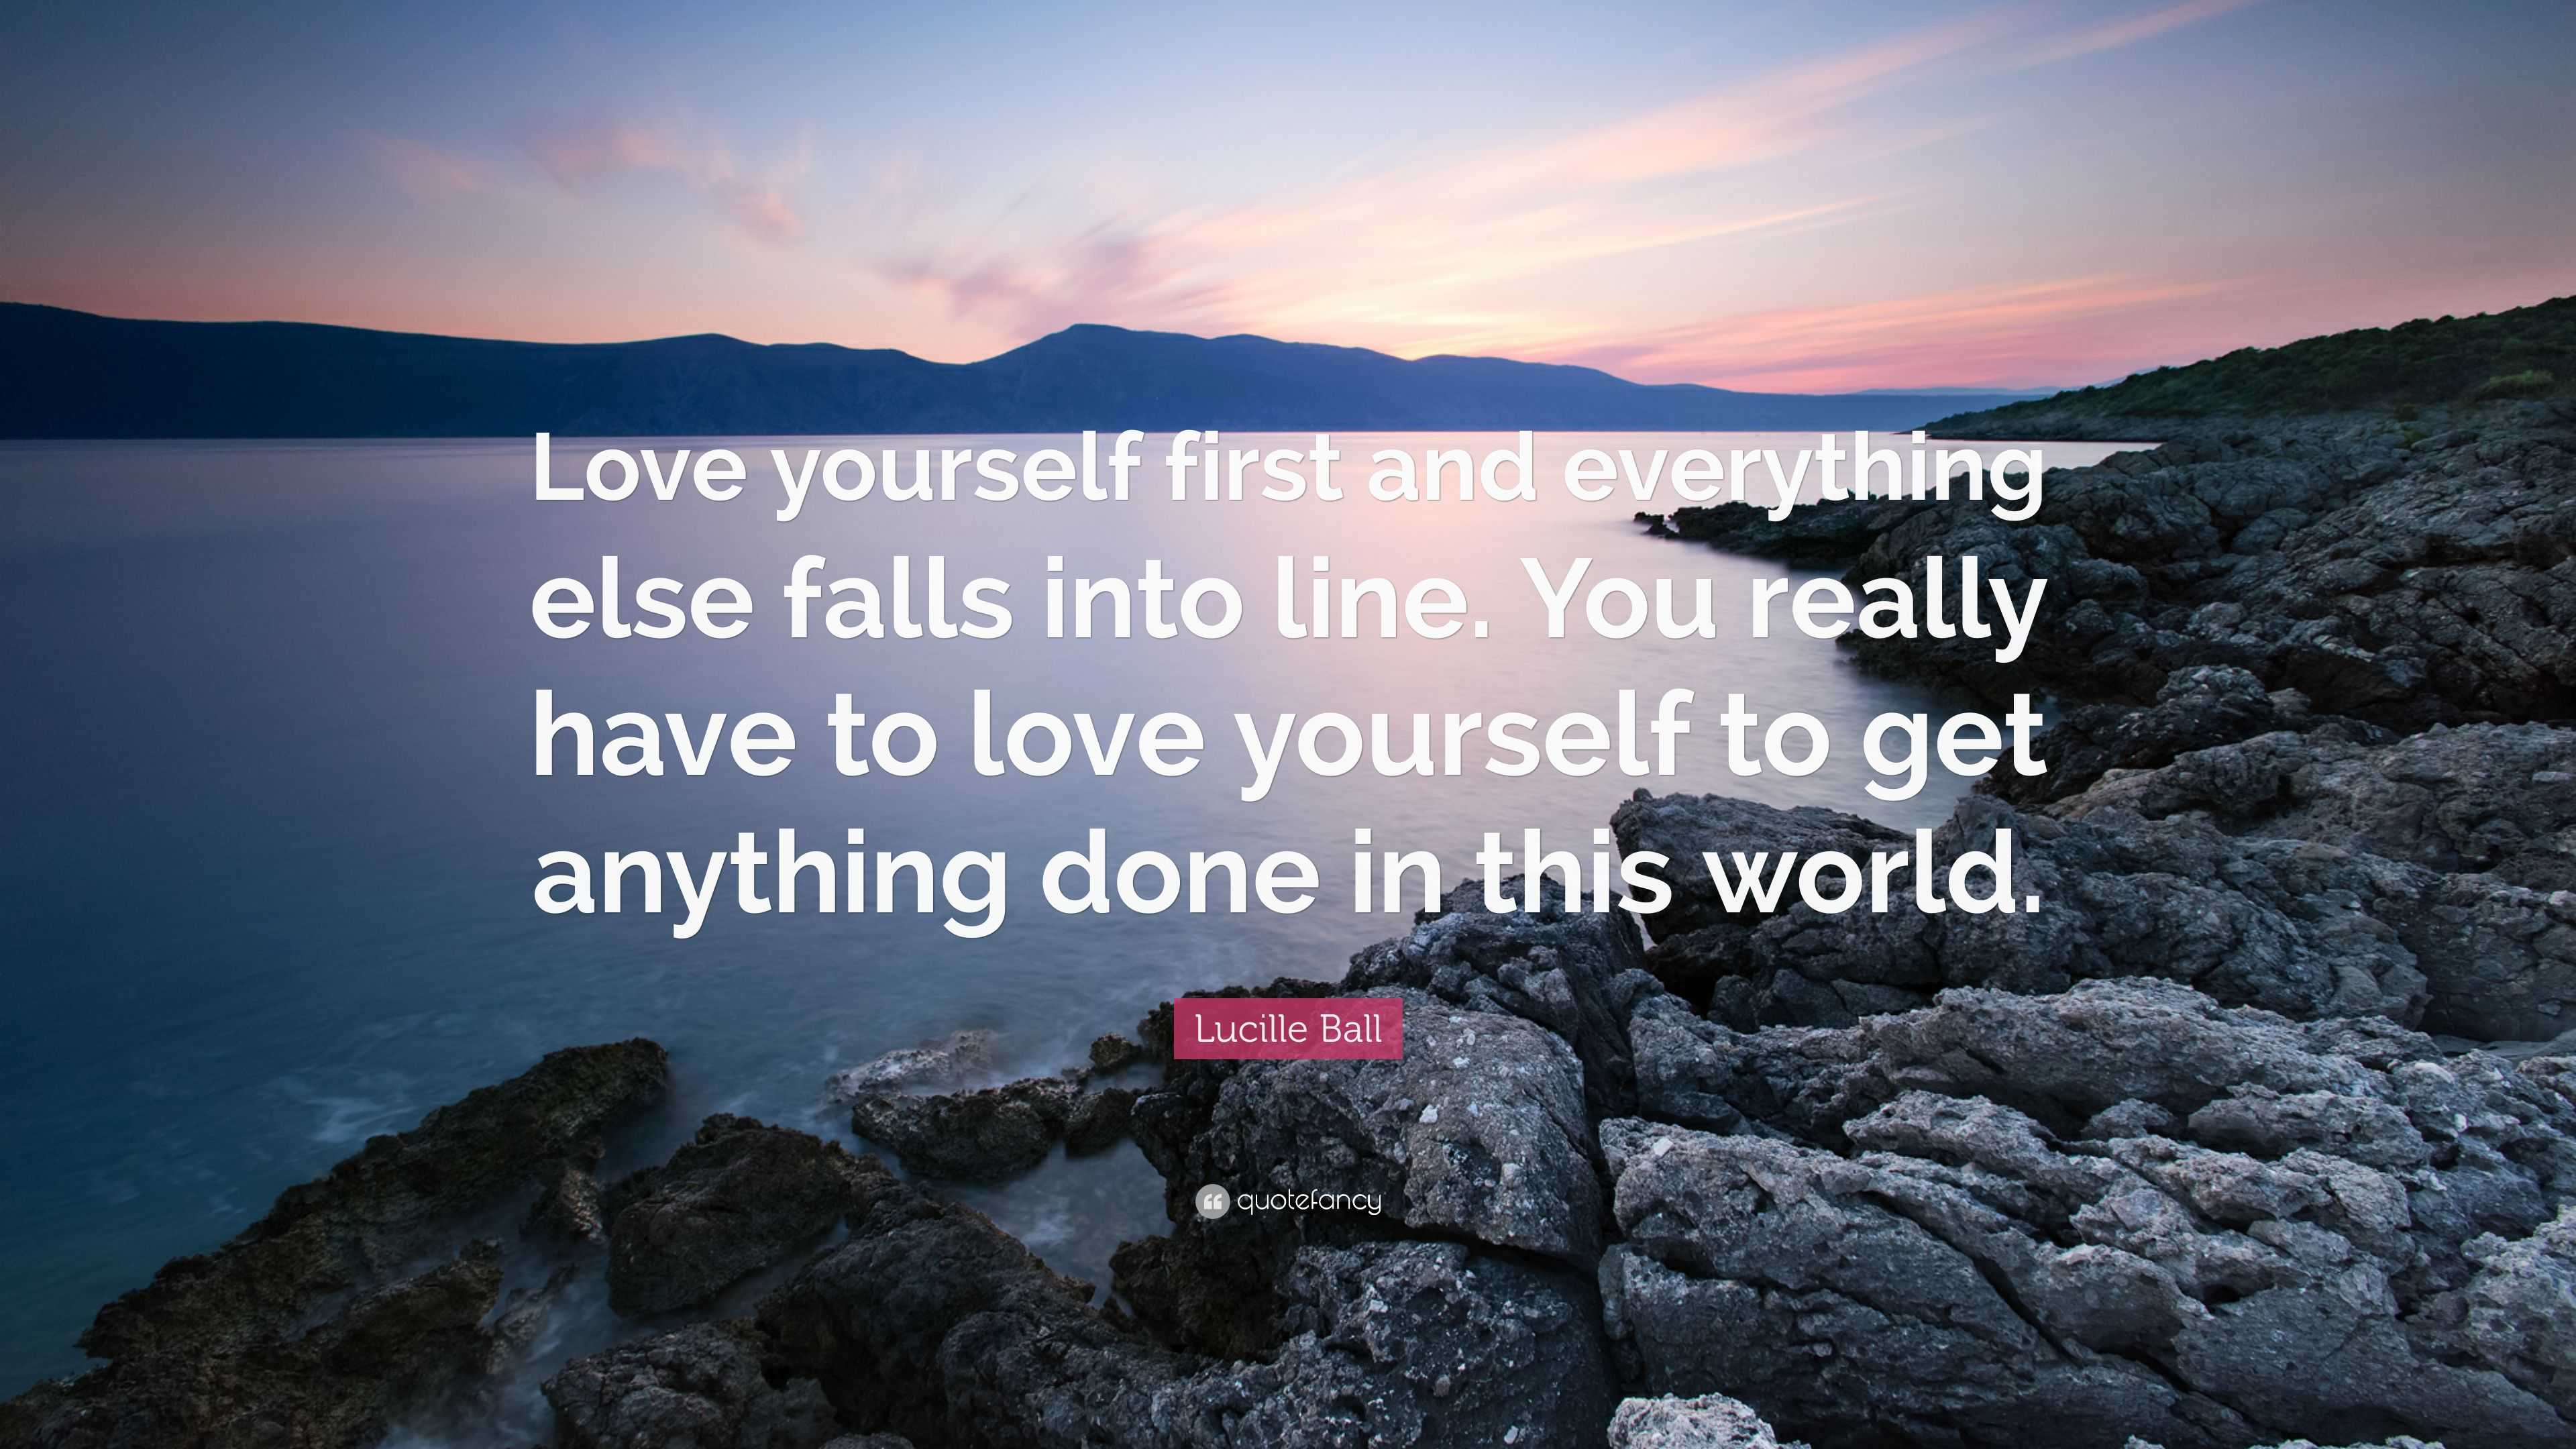 Lucille Ball Quote: “Love yourself first and everything else falls into ...